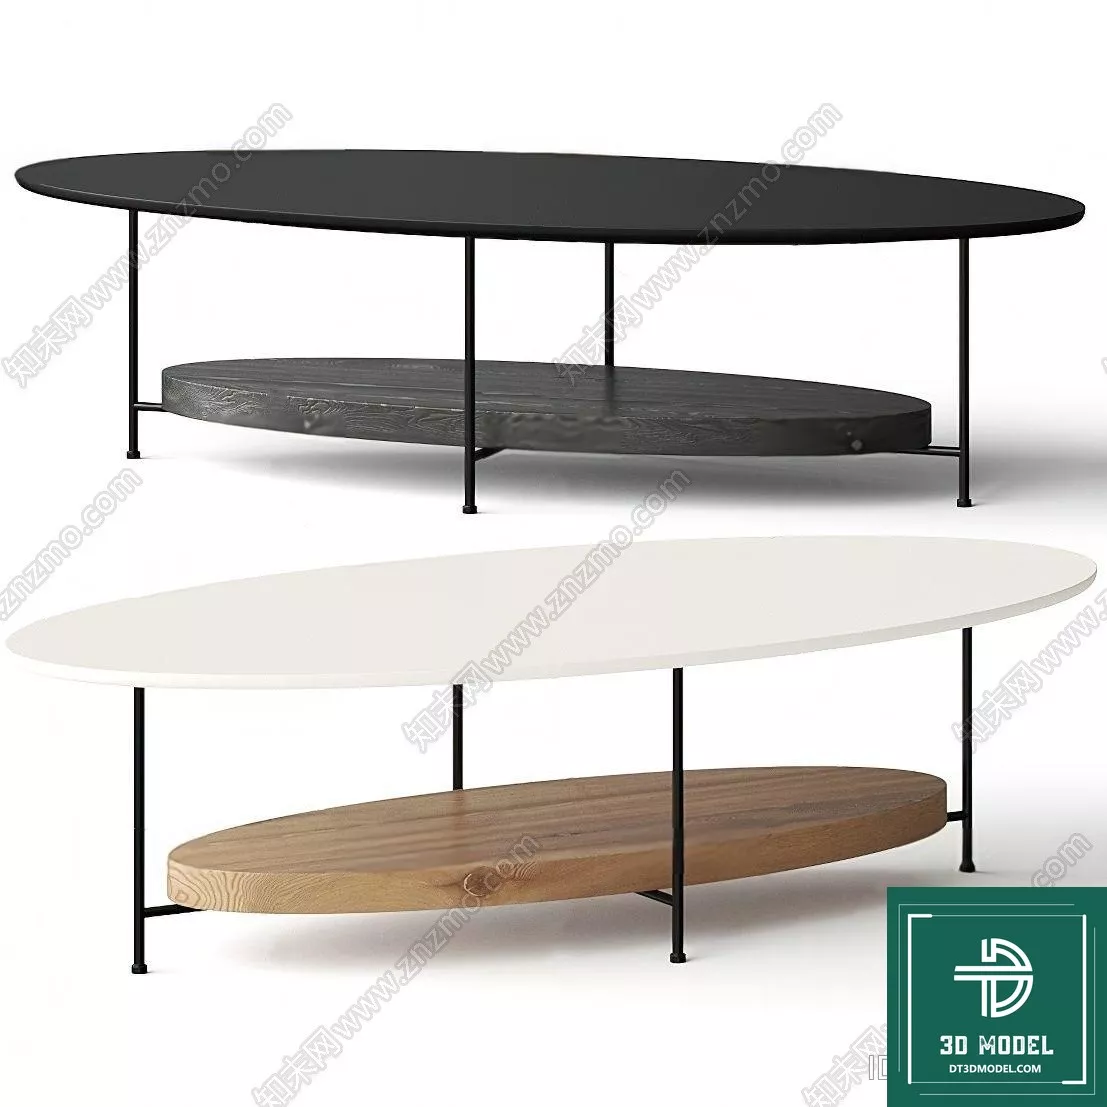 MODERN TEA TABLE - SKETCHUP 3D MODEL - VRAY OR ENSCAPE - ID14899